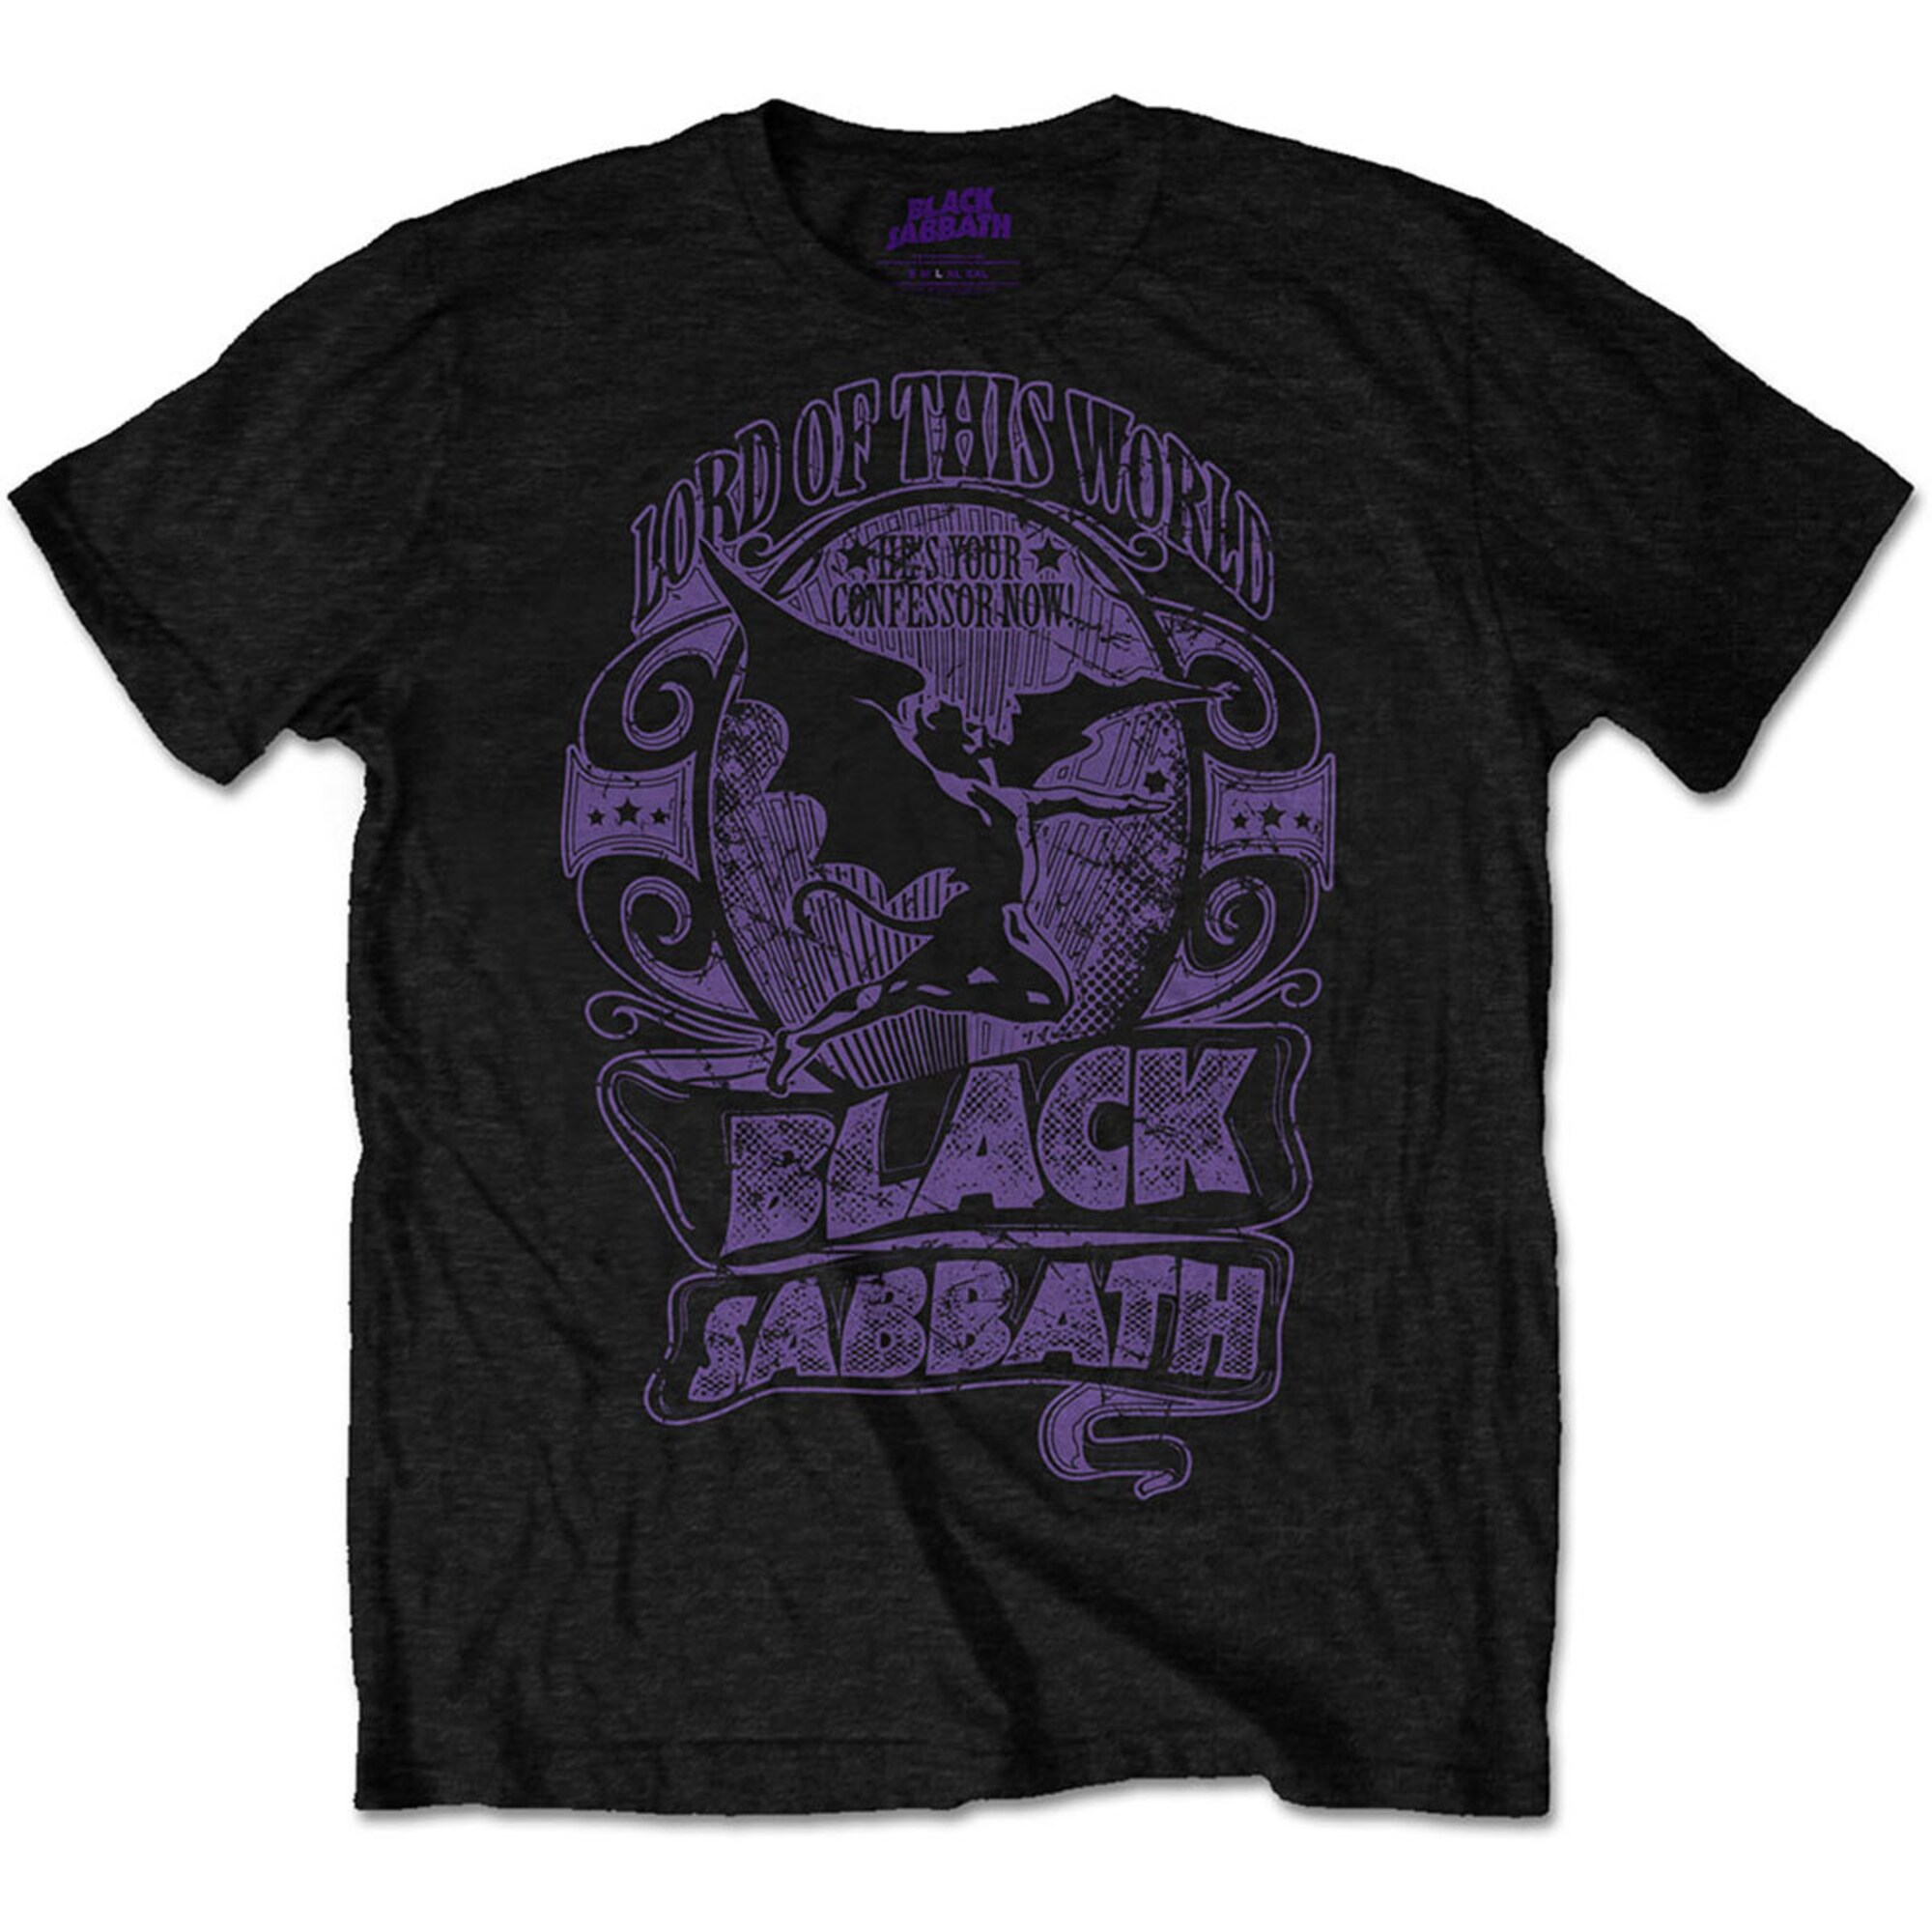 Discover Black Sabbath Lord of this World Ozzy Osbourne Tee T-Shirt